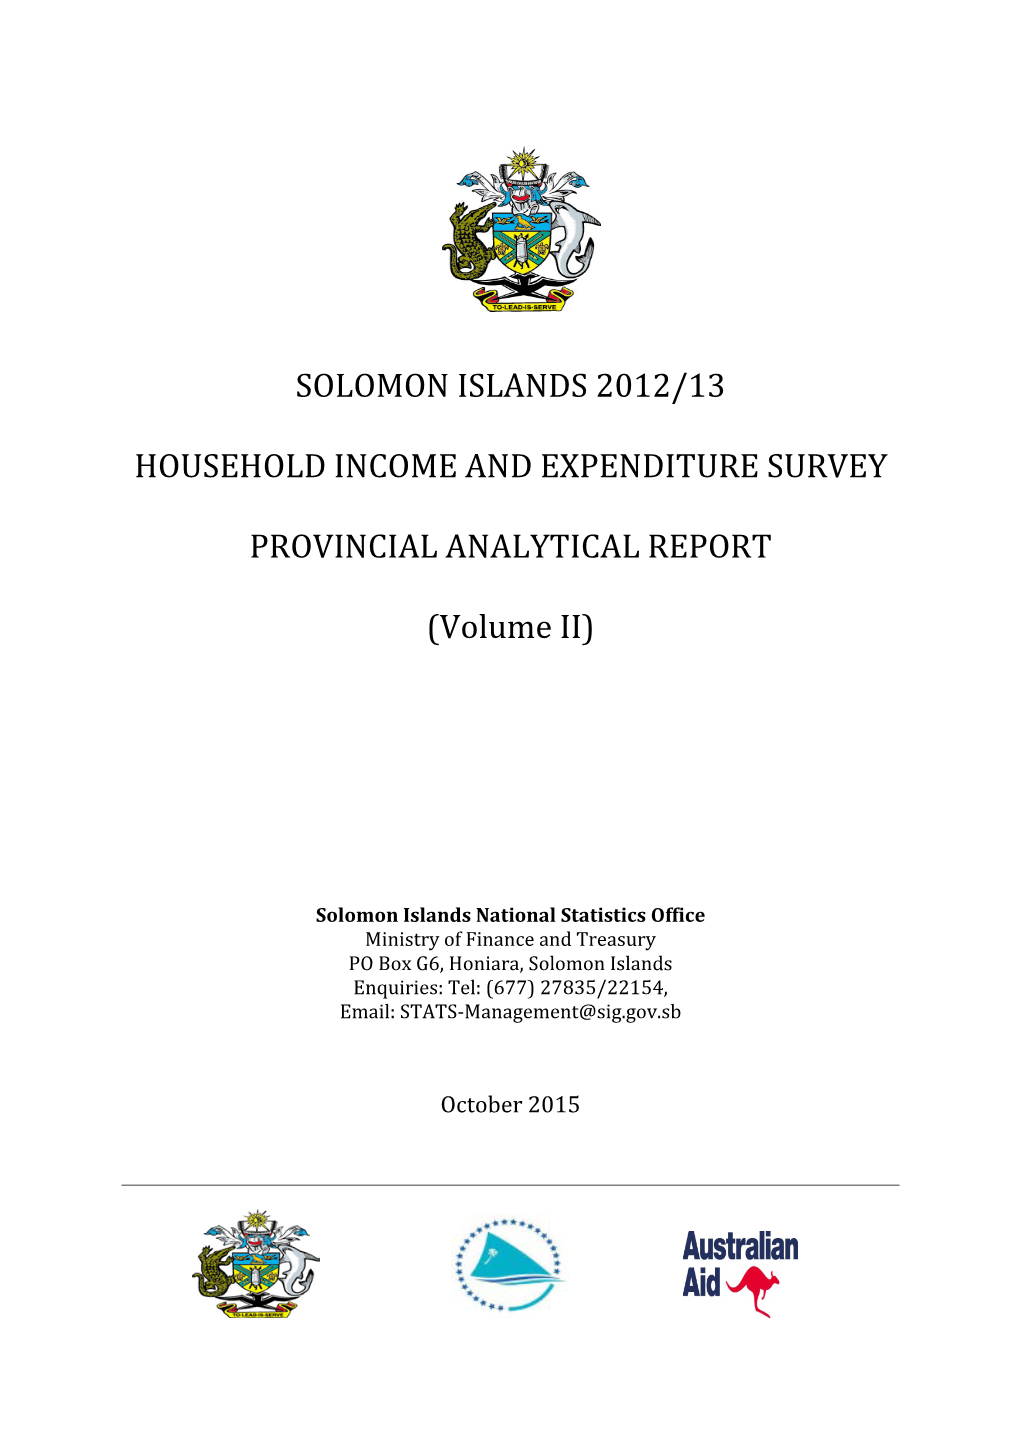 Solomon Islands 2012/13 Household Income and Expenditure Survey (HIES) Focusing on the Provincial Level Analysis